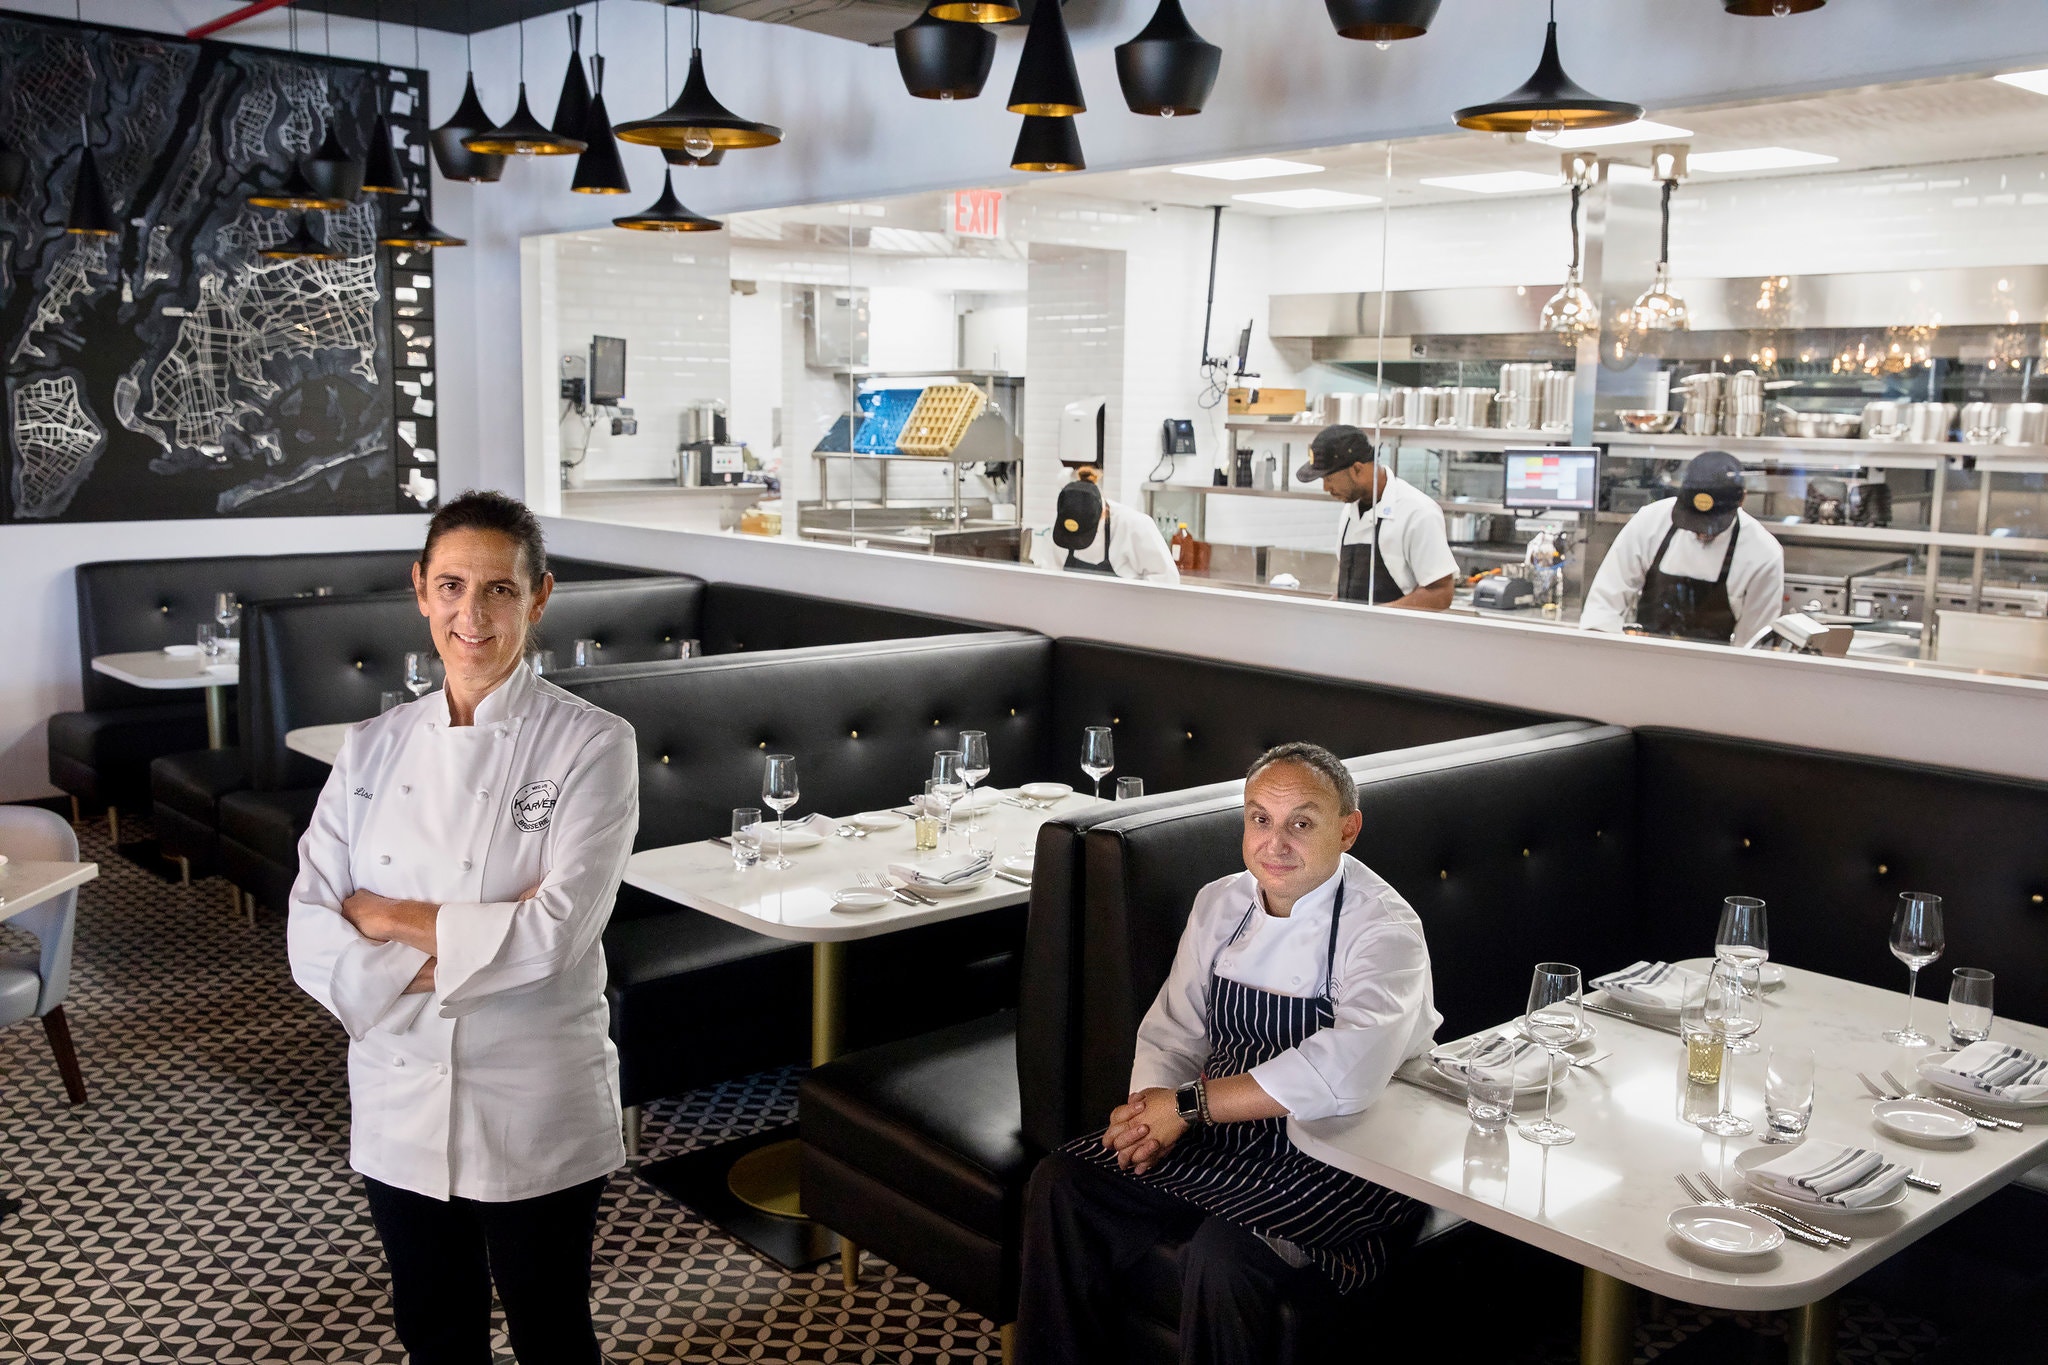 Brasserie With an Eye on Expansion Takes Root in Sheepshead Bay, Brooklyn